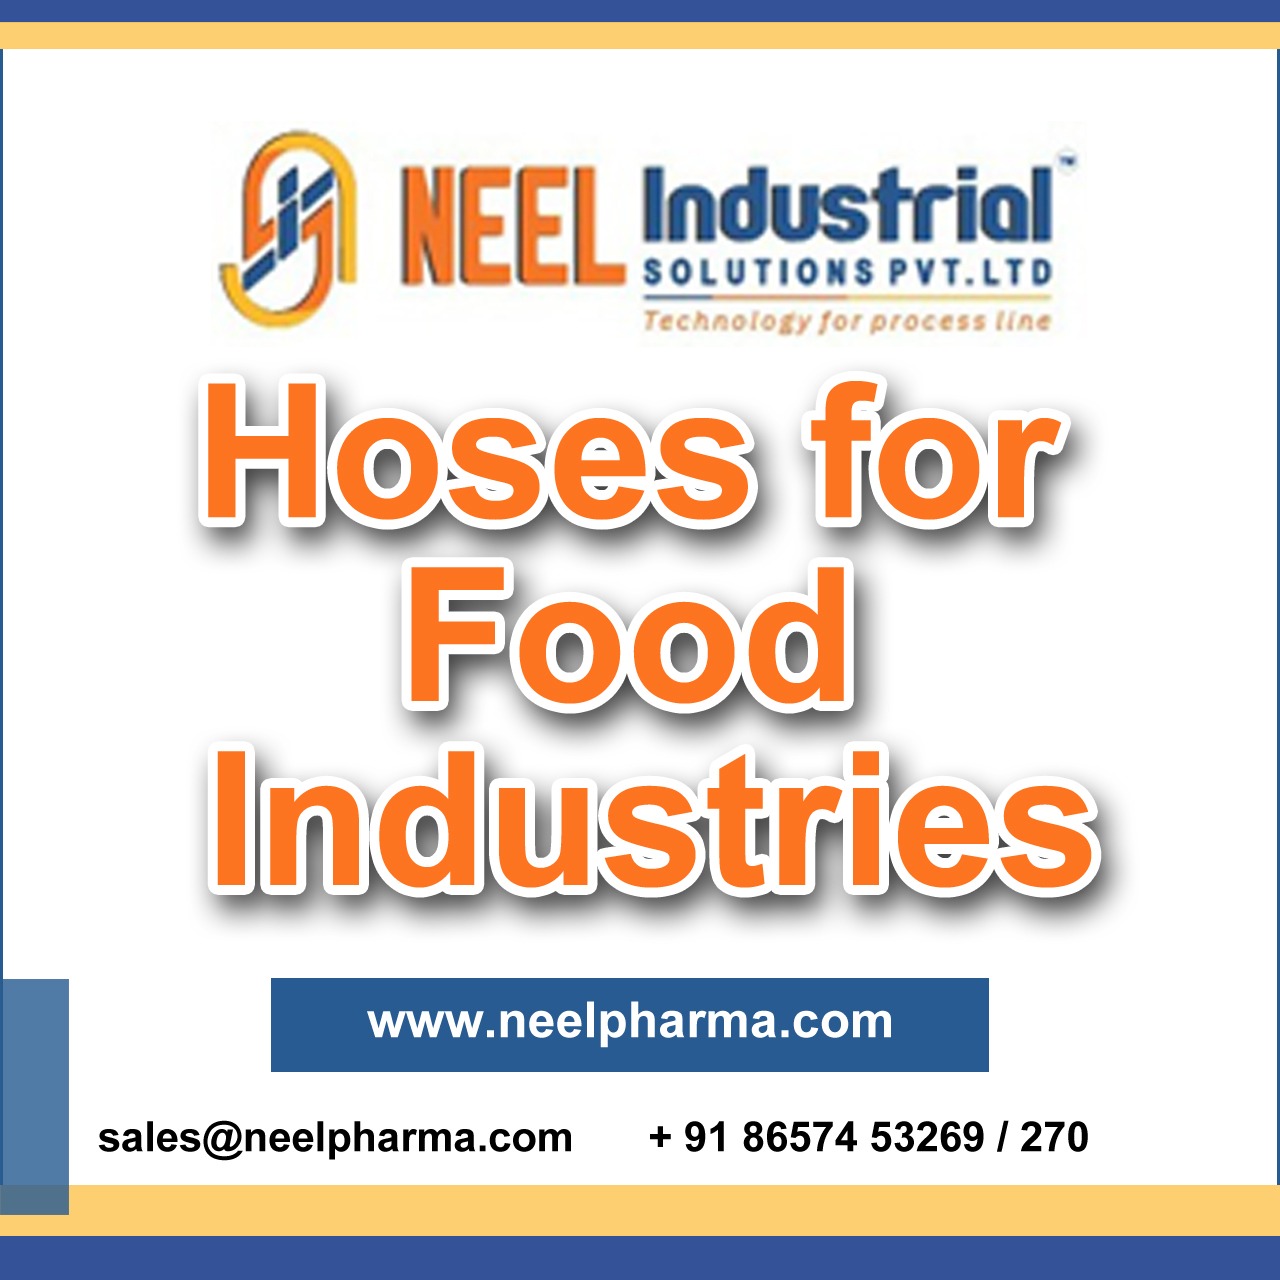 Hoses for food industries